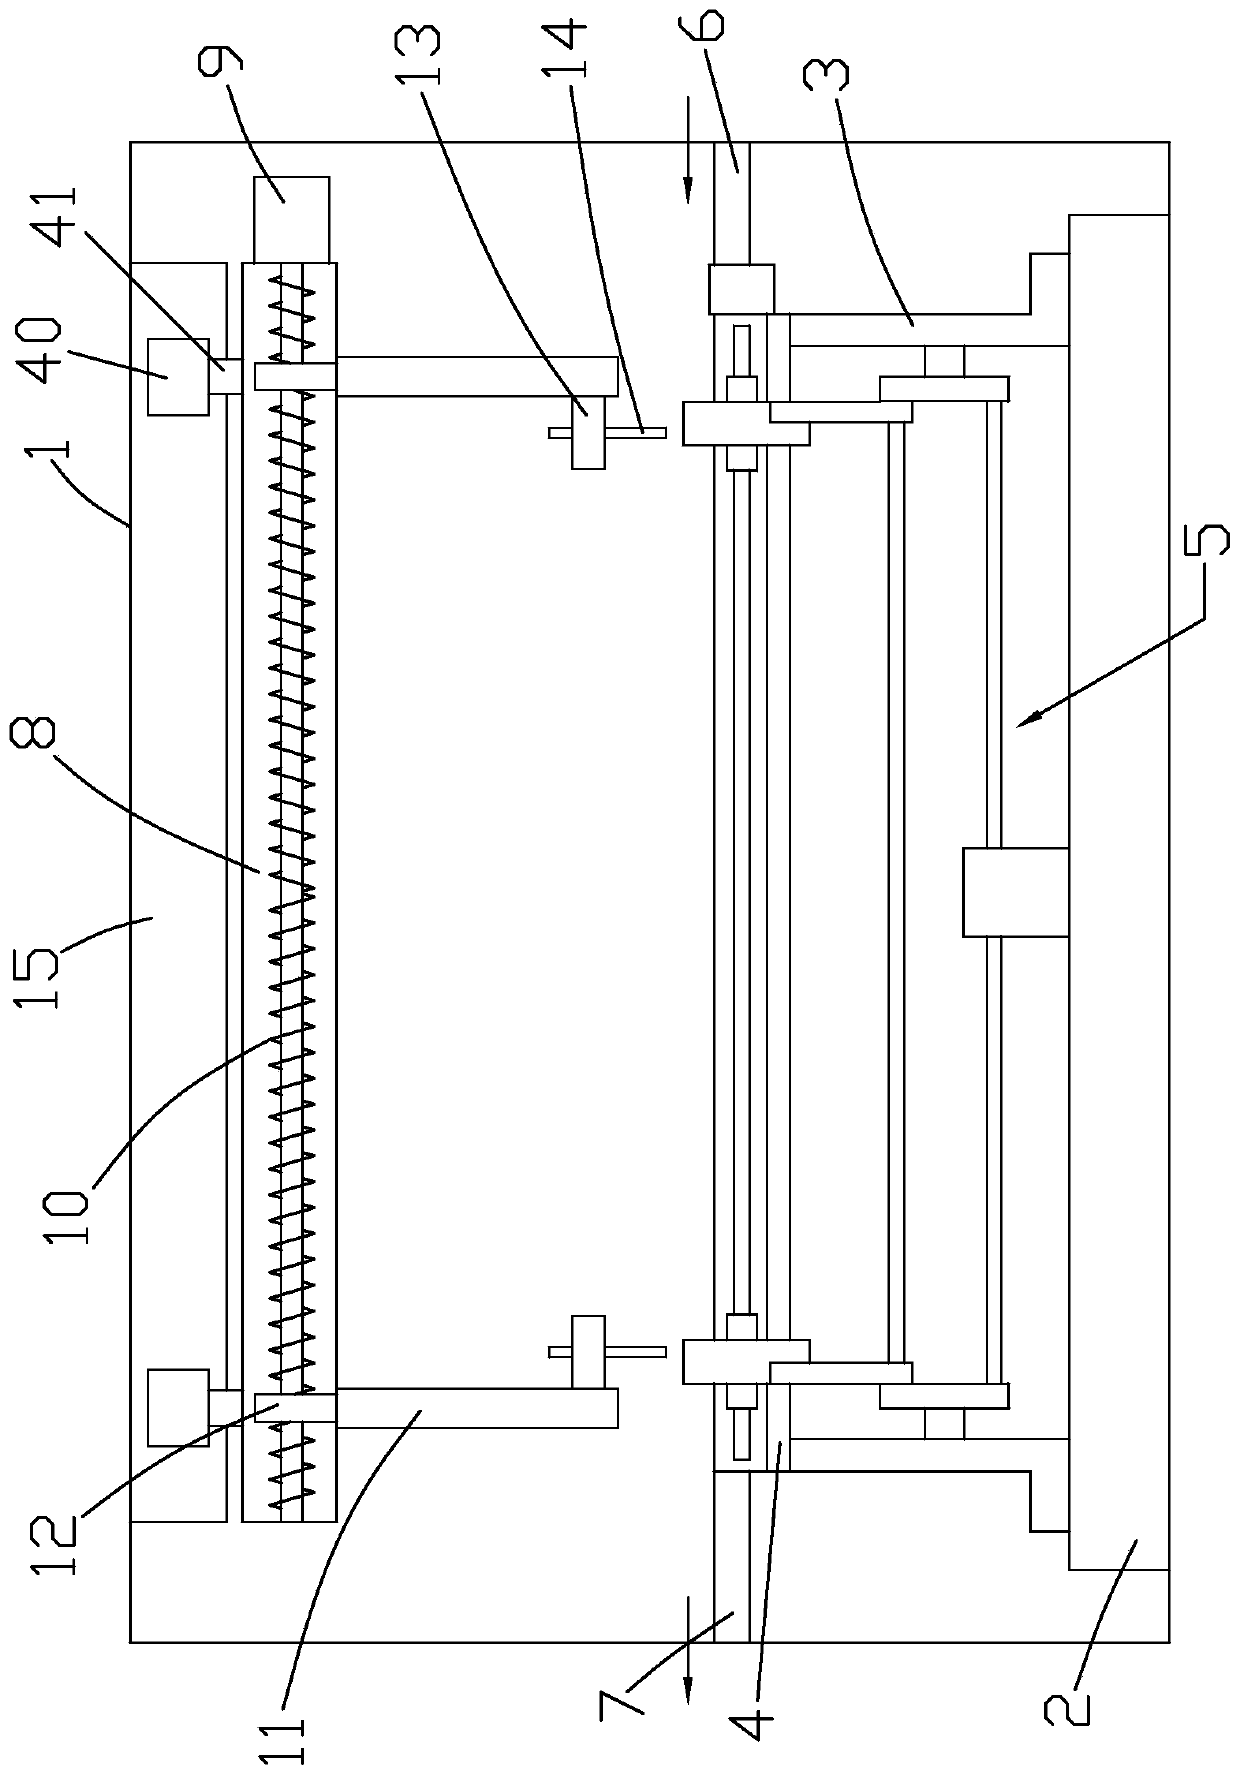 Welding device for hardware fitting production